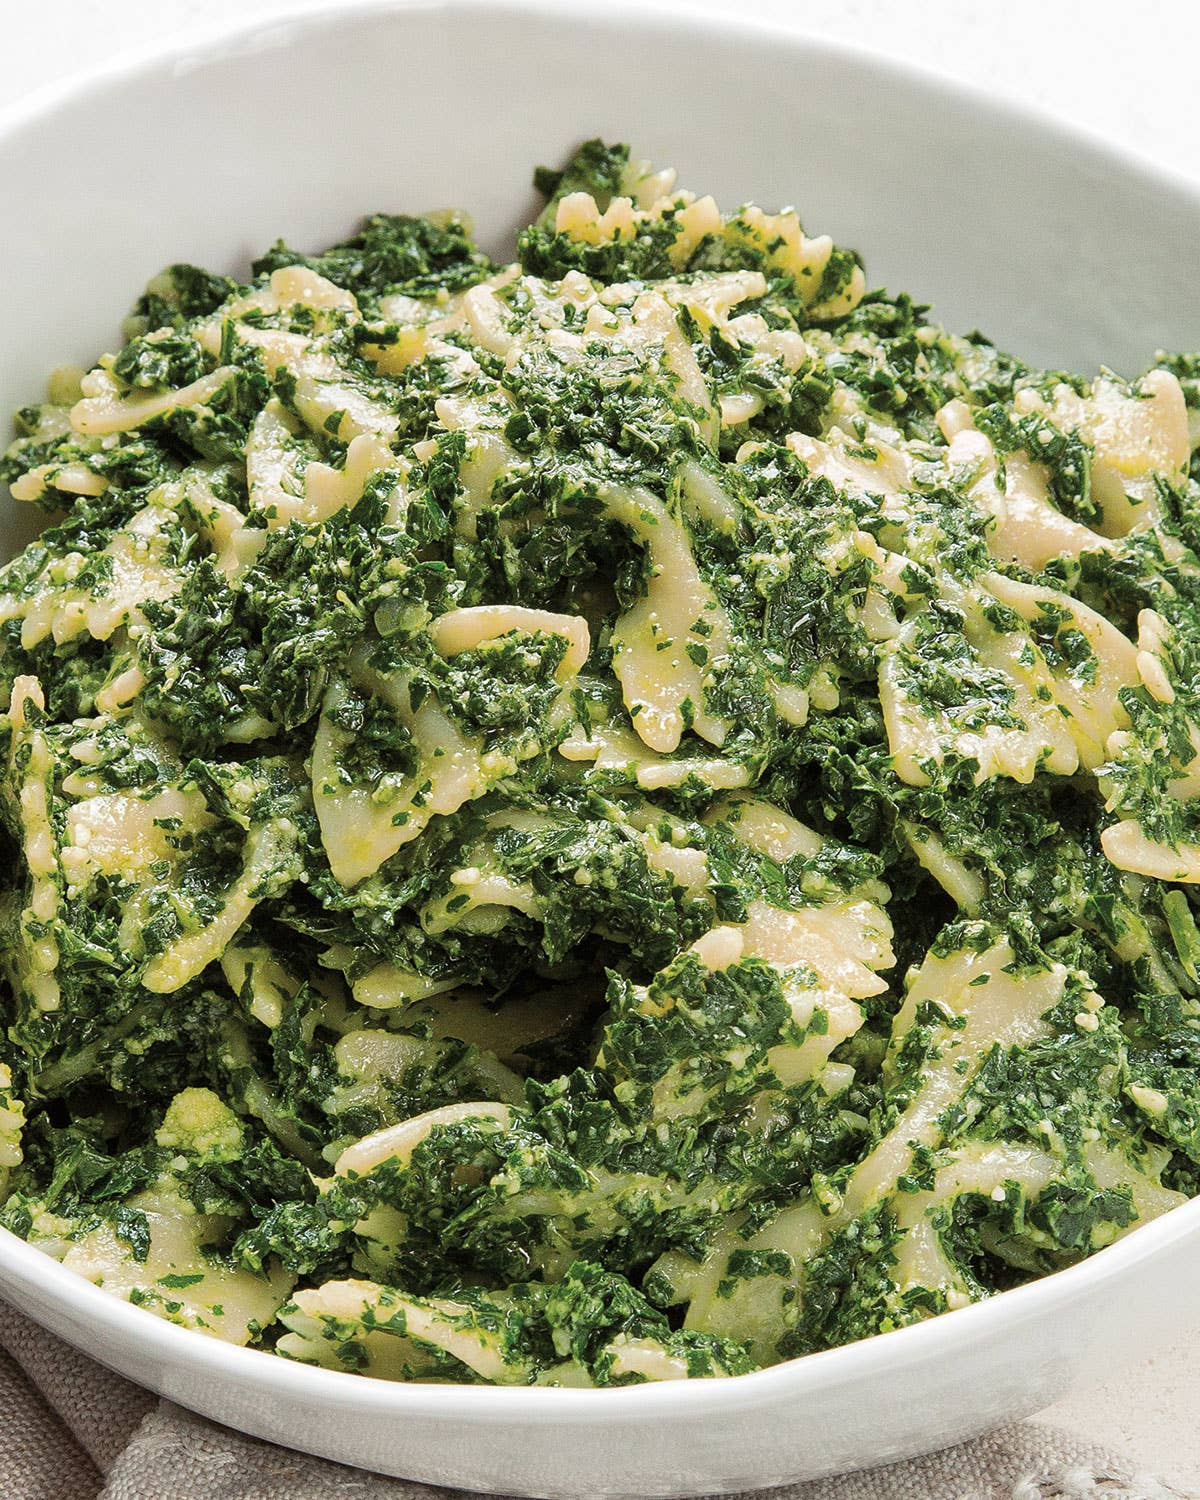 The Kale Pesto You Can Make in 15 Minutes